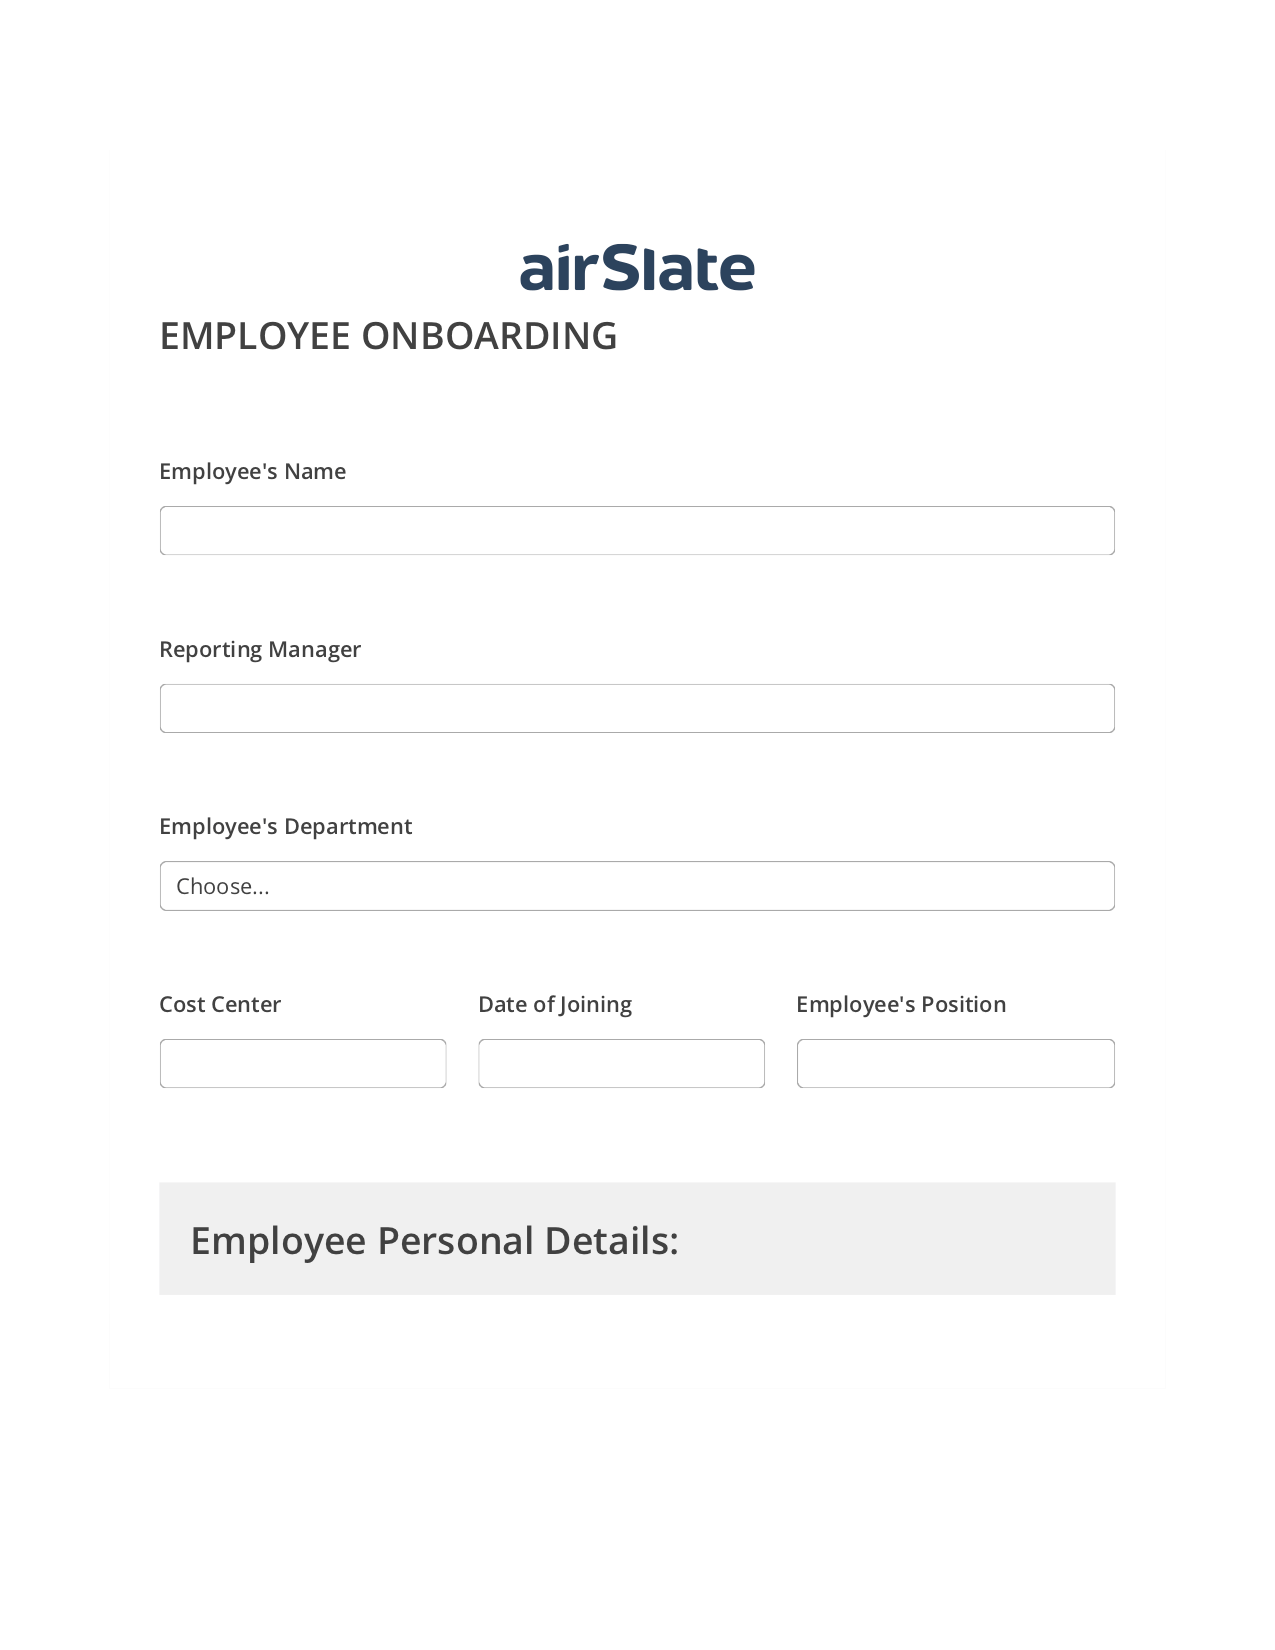 Employee Onboarding Workflow Pre-fill from Salesforce Records with SOQL Bot, Jira Bot, Export to Excel 365 Bot